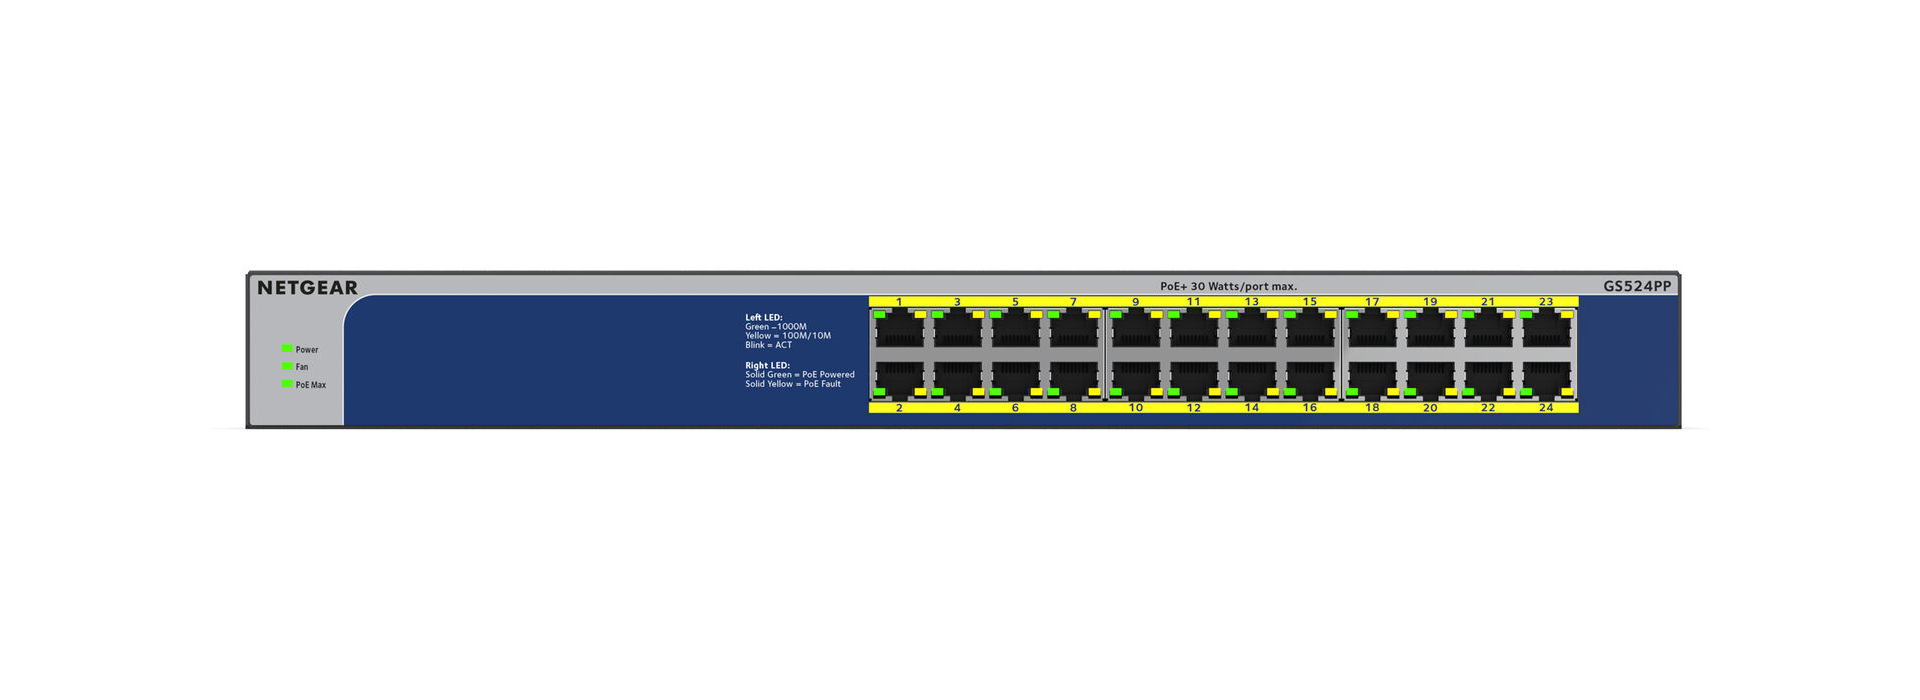 Gigabit Unmanaged Switch Series (GS524PP)